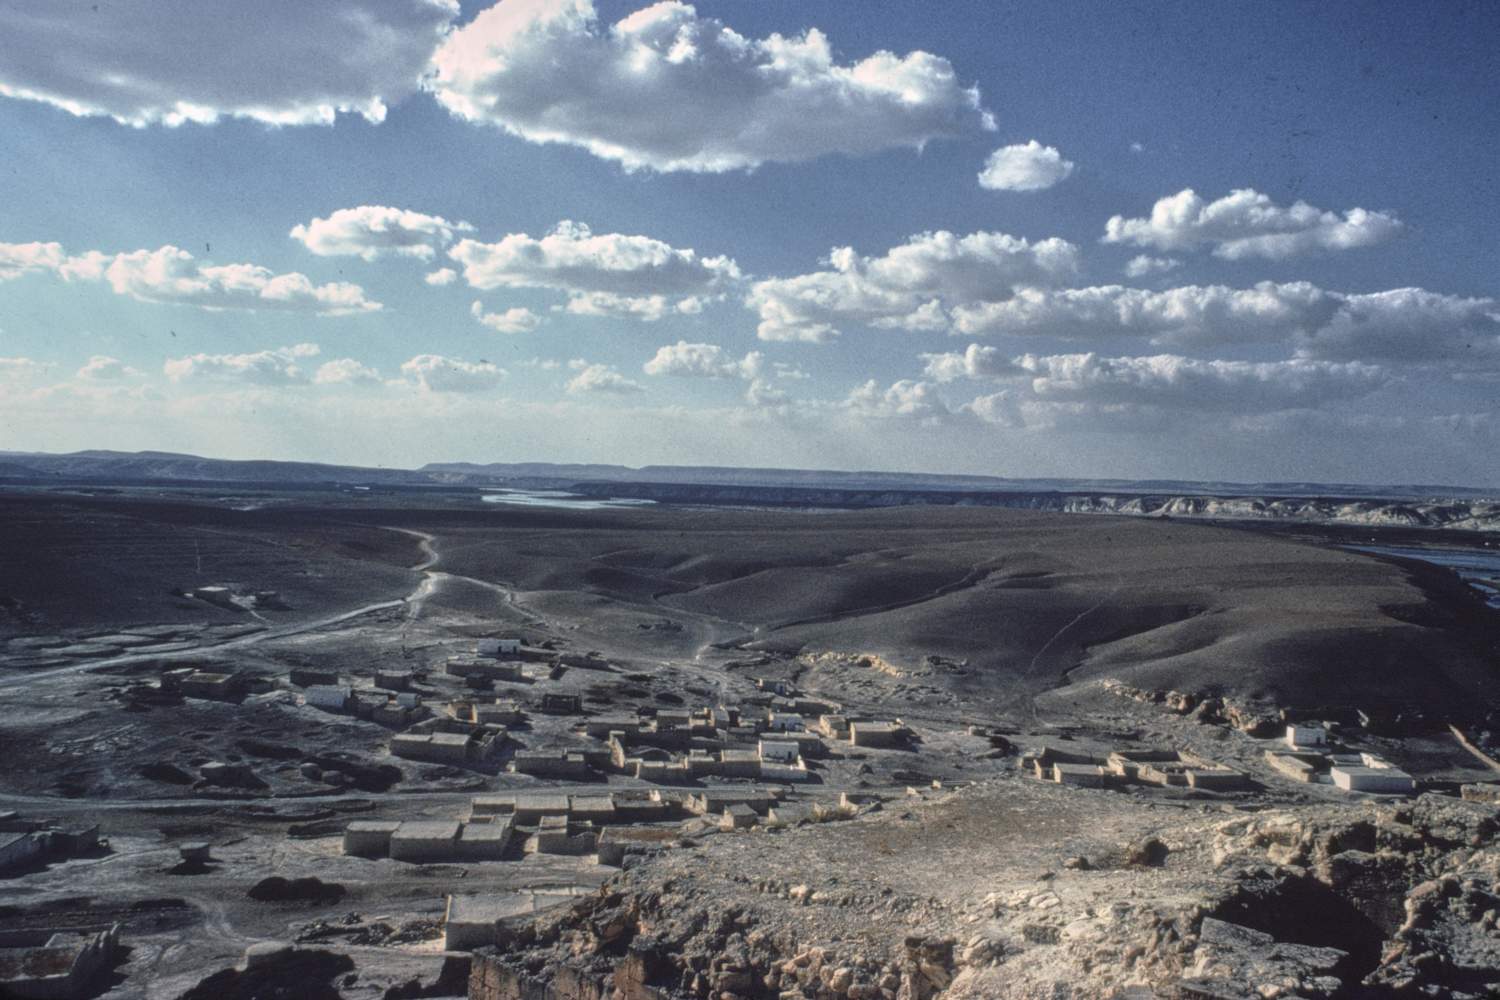 View from site toward Euphrates and neighboring village.